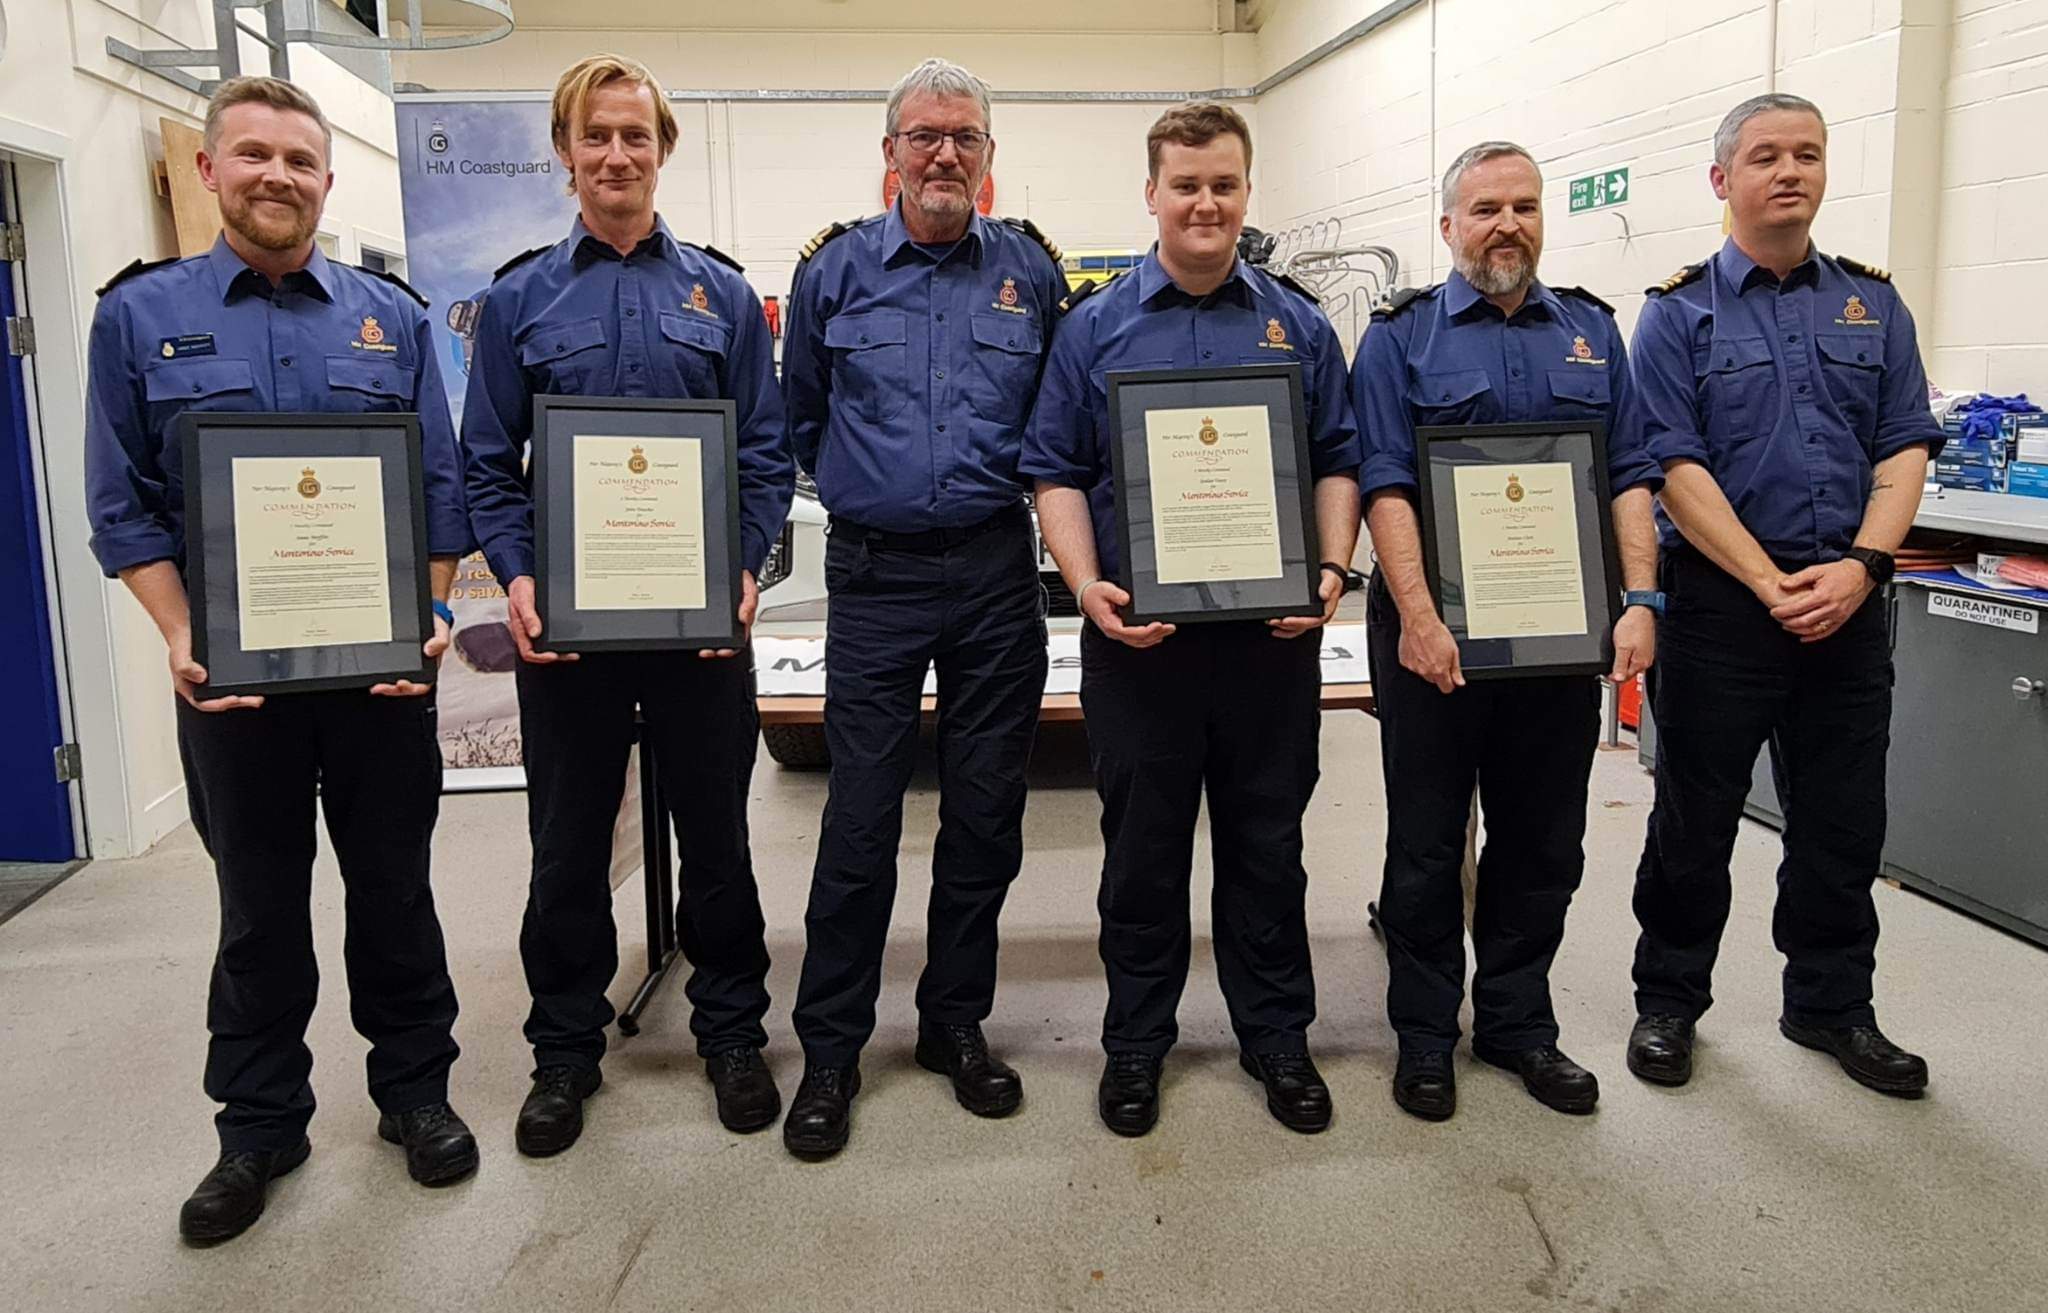 North Yorkshire coastguards awarded for rescuing man from sea